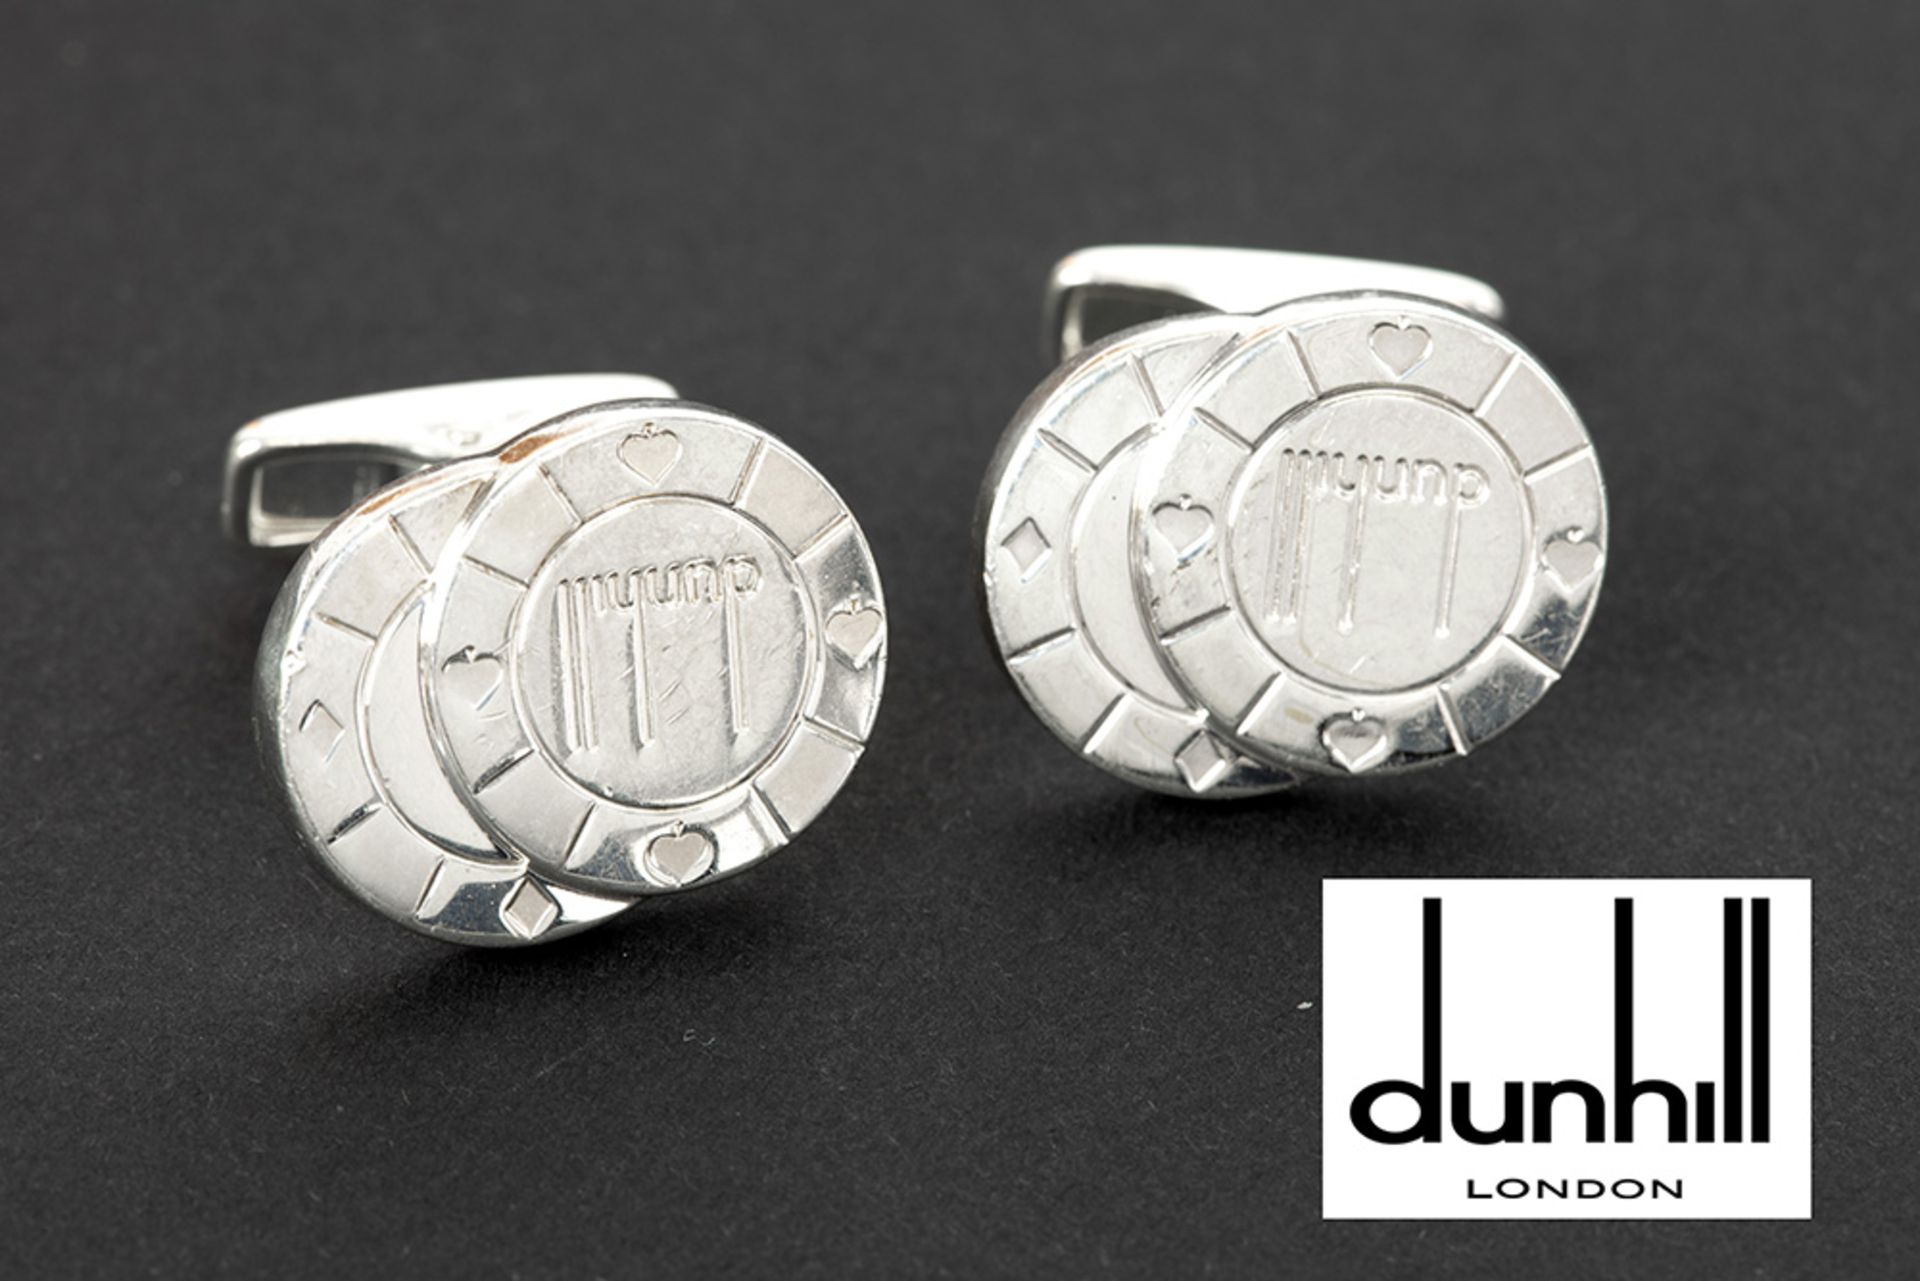 pair of Dunhill signed cuff-links in marked silver || DUNHILL paar manchetteknopen in massief